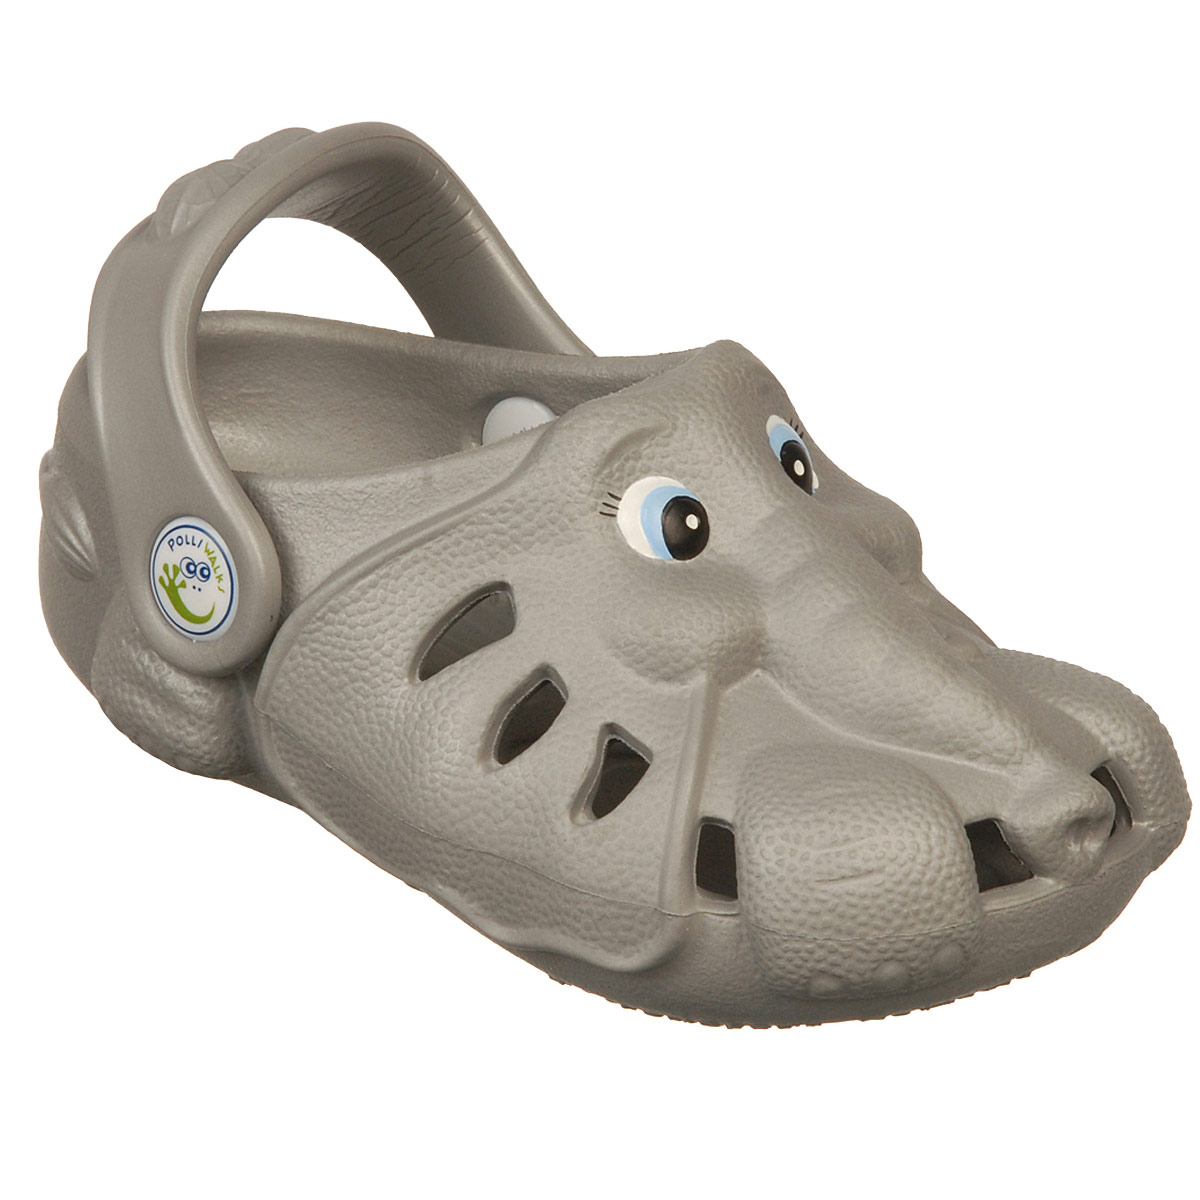 Polliwalks : Toddler shoes Ethan the ELEPHANT Gray # 9